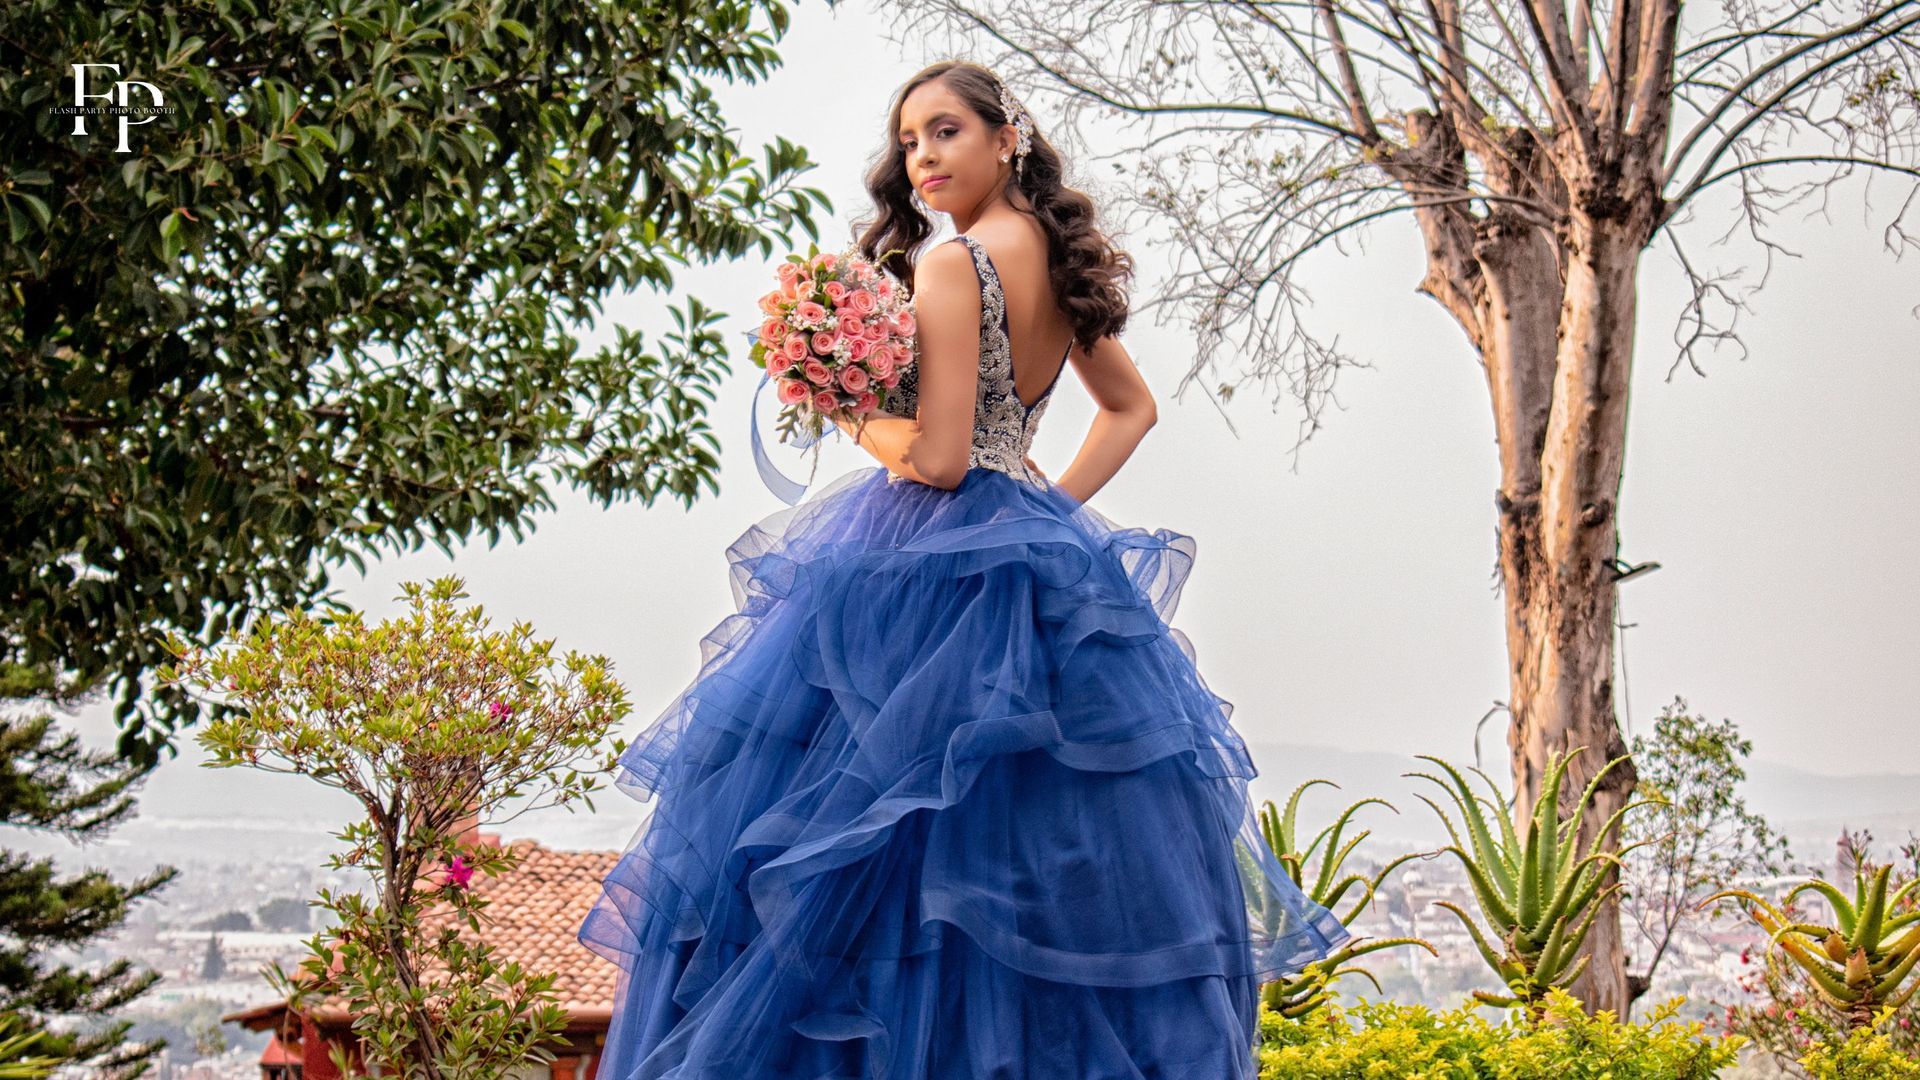 The celebrant holding up a bouquet posing at the venue for her quinceanera Manor